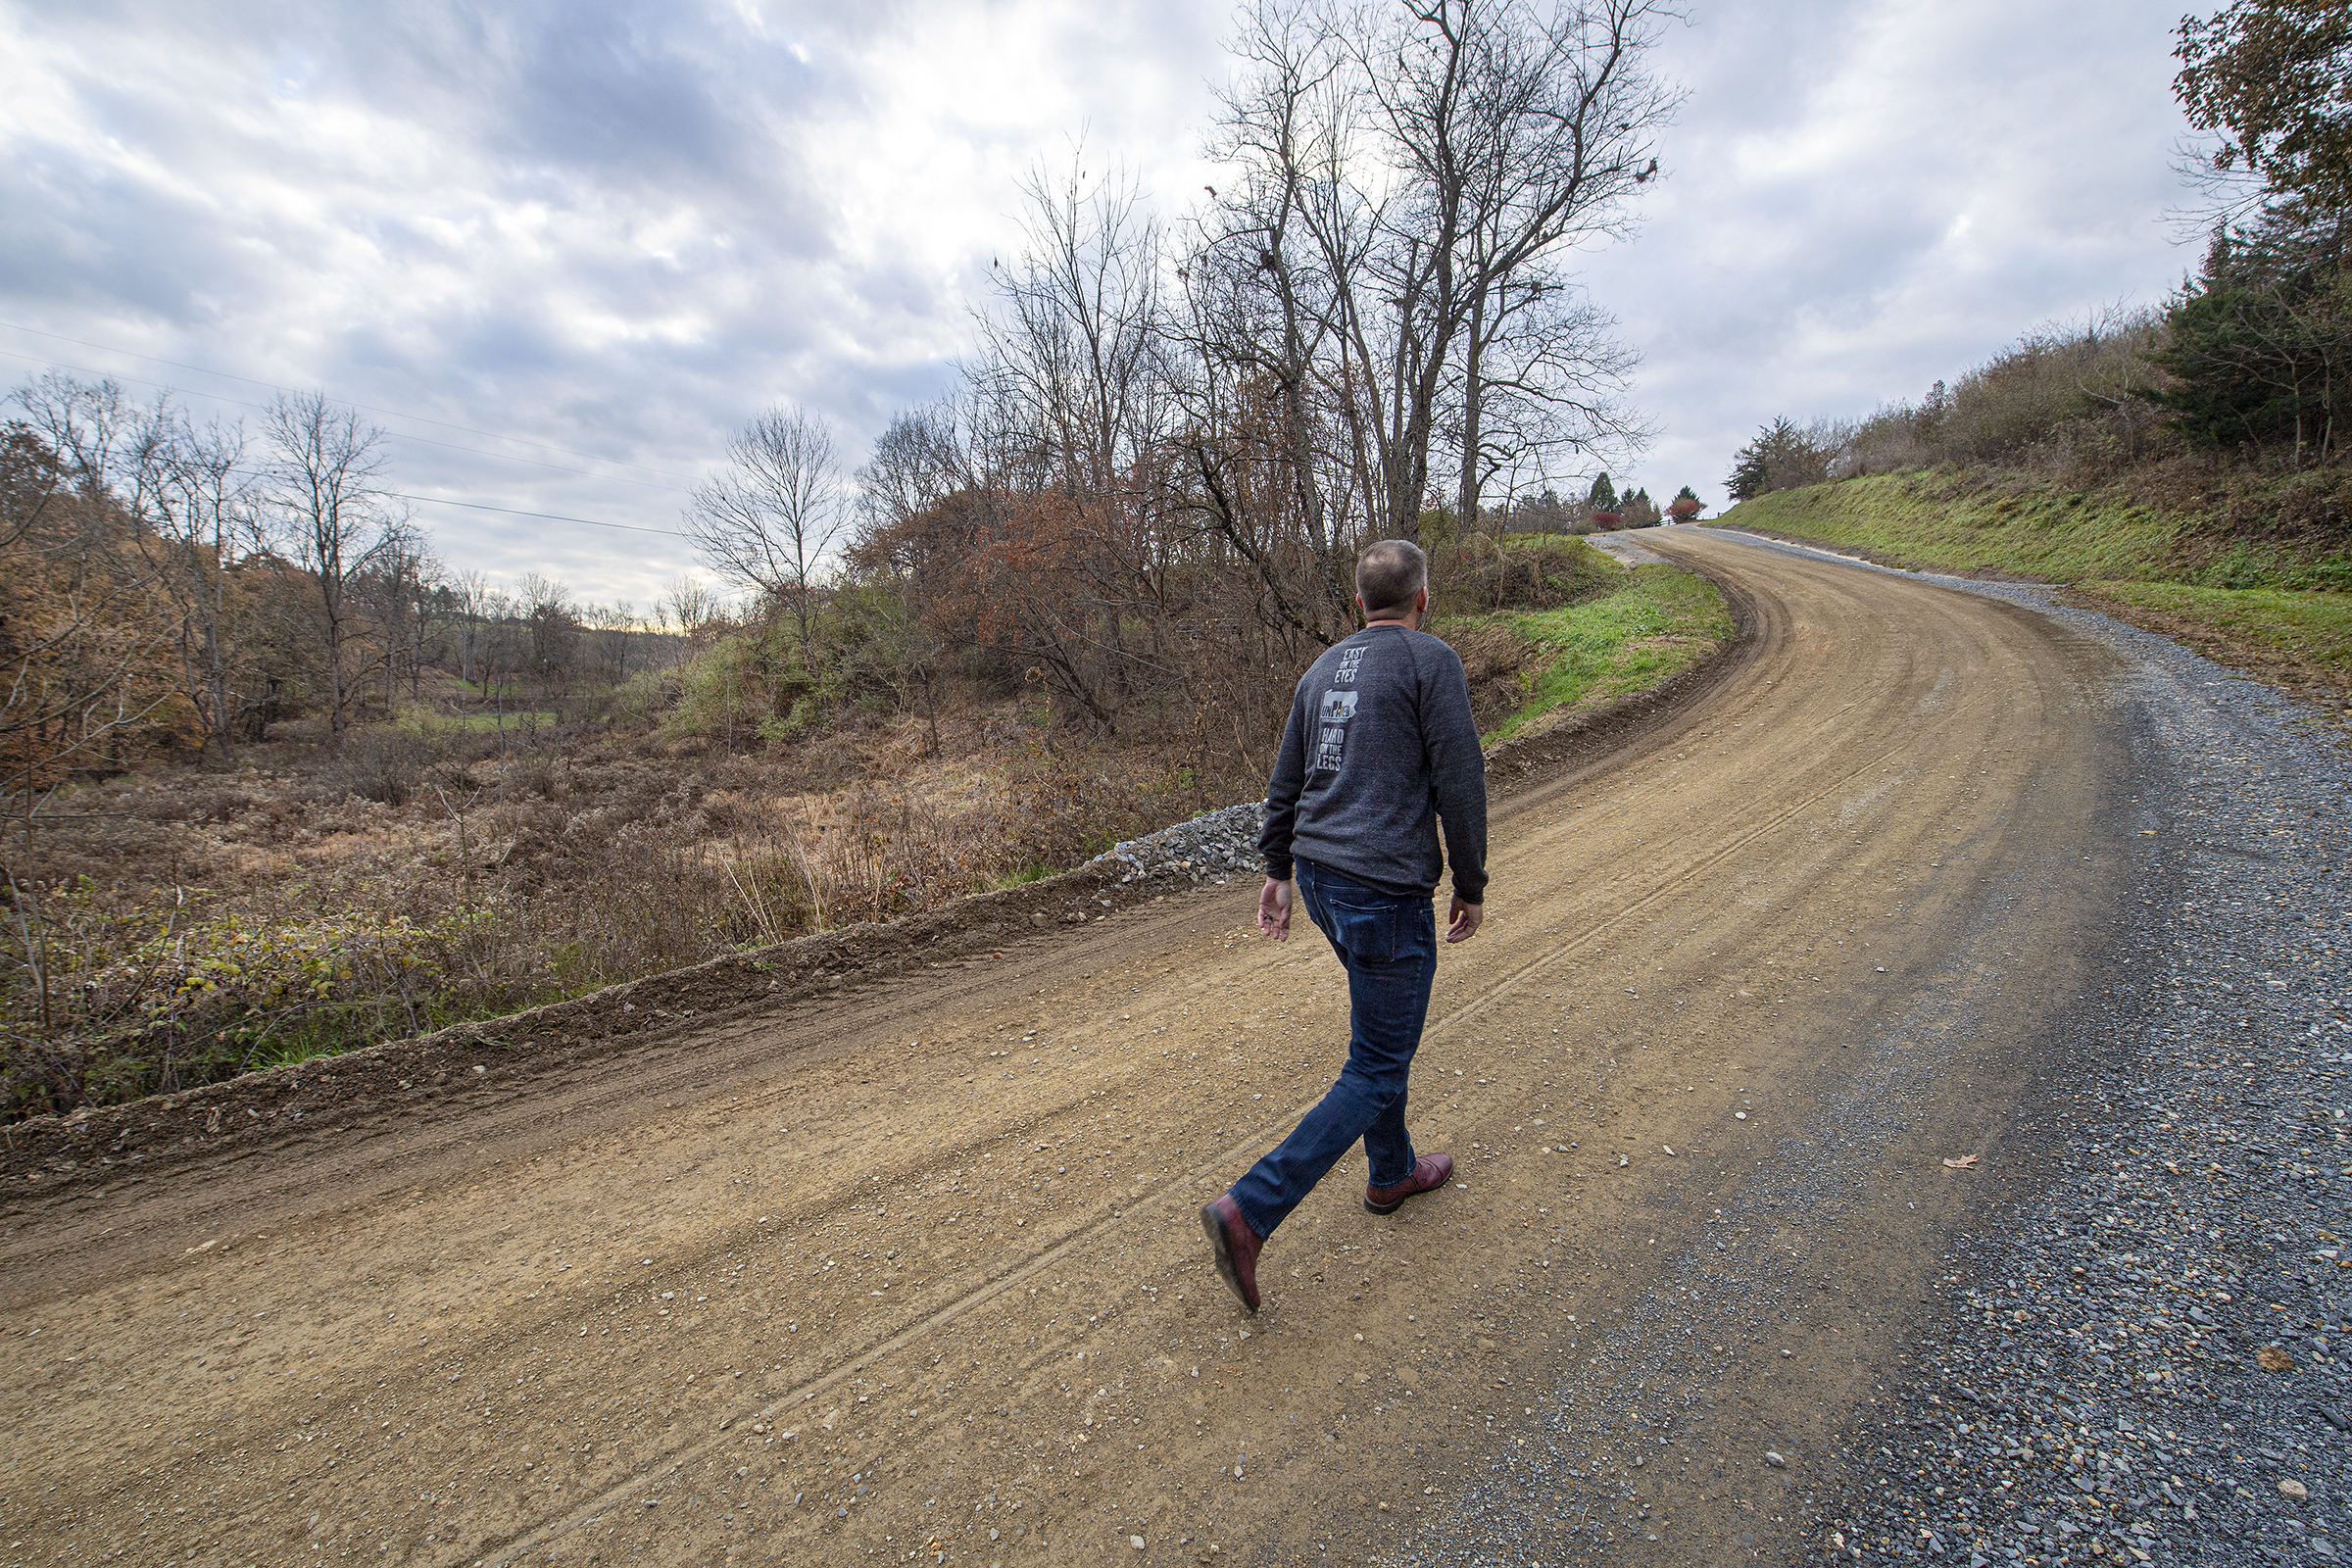 Pa Dirt And Gravel Roads Map Penn State's Center For Dirt And Gravel Studies Combats Pollution From Unpaved  Roads